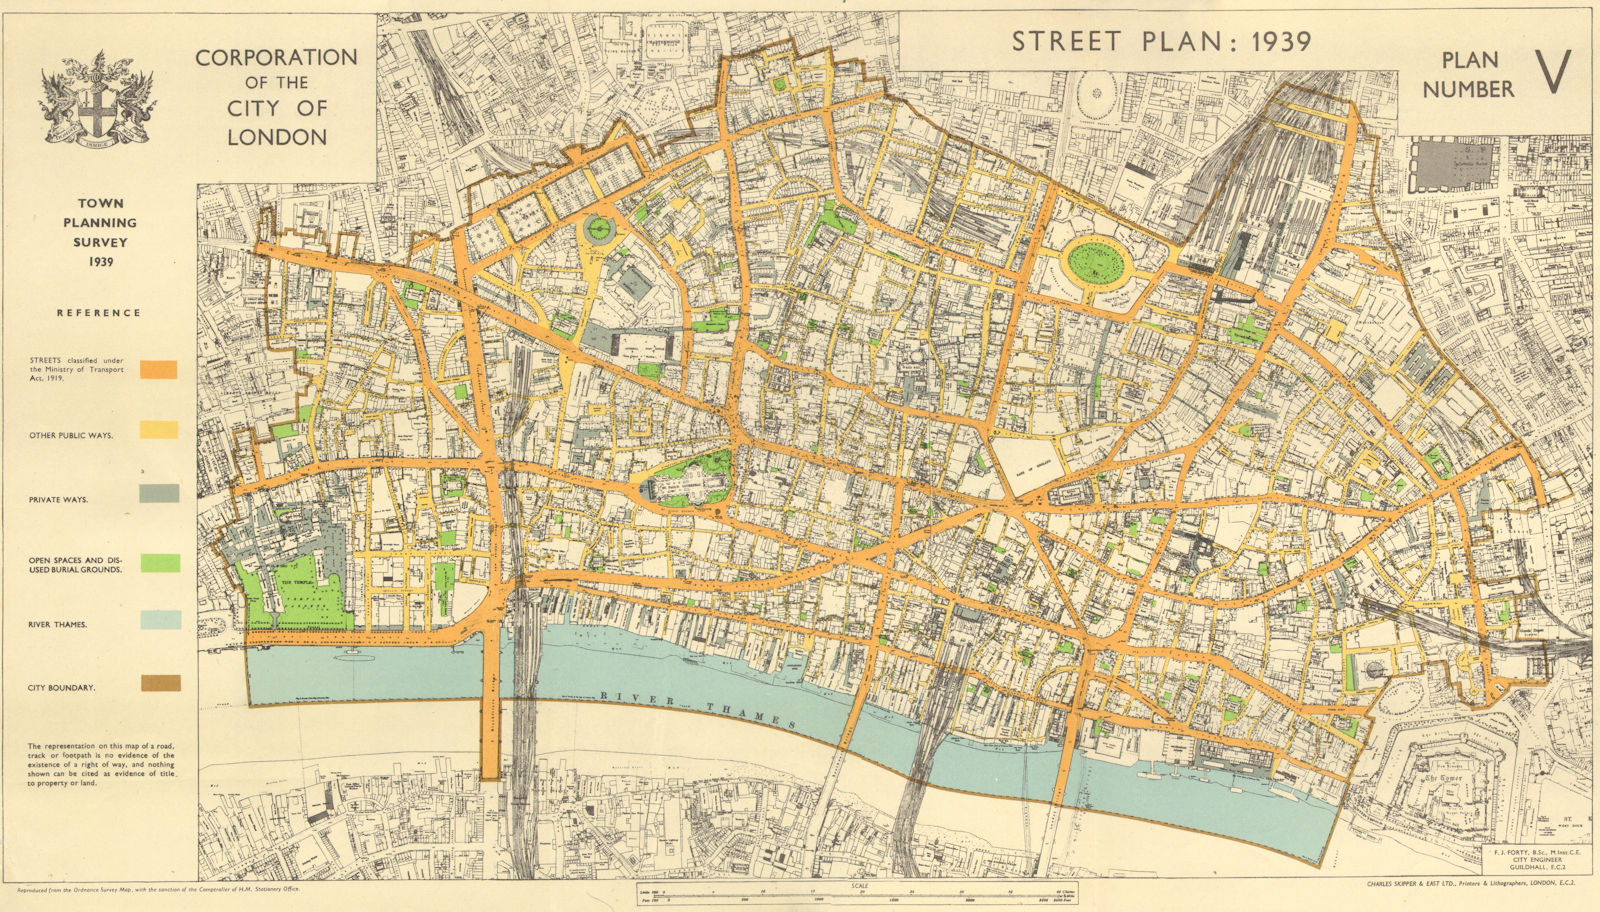 CITY OF LONDON. Town planning survey 1939. STREET PLAN 1944 old vintage map